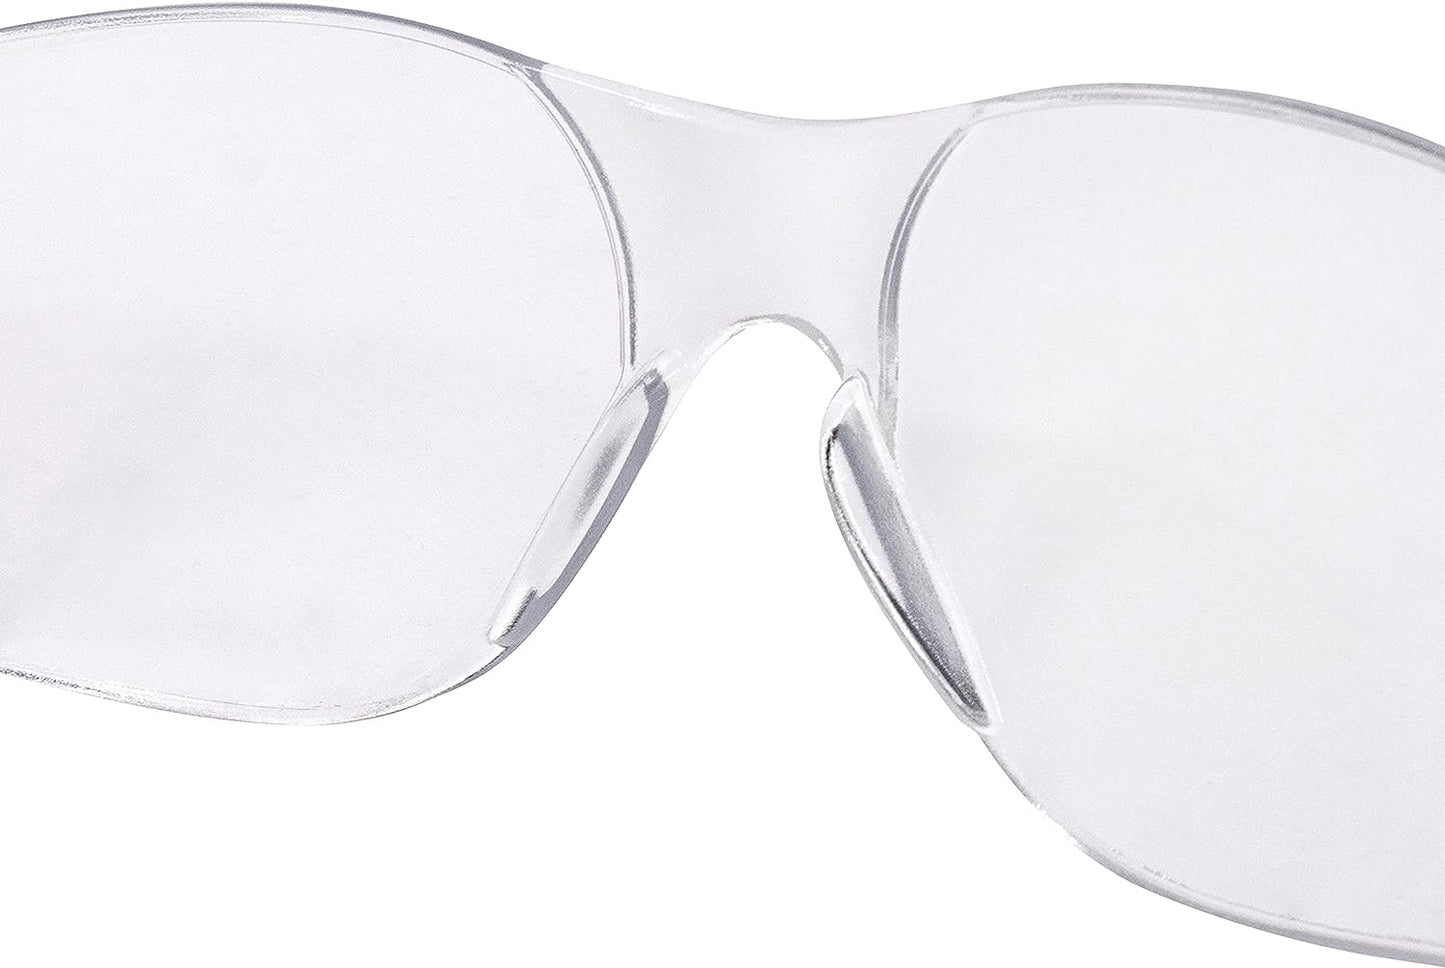 Radians Mirage Clear Lenses Safety Glasses #MR0110ID